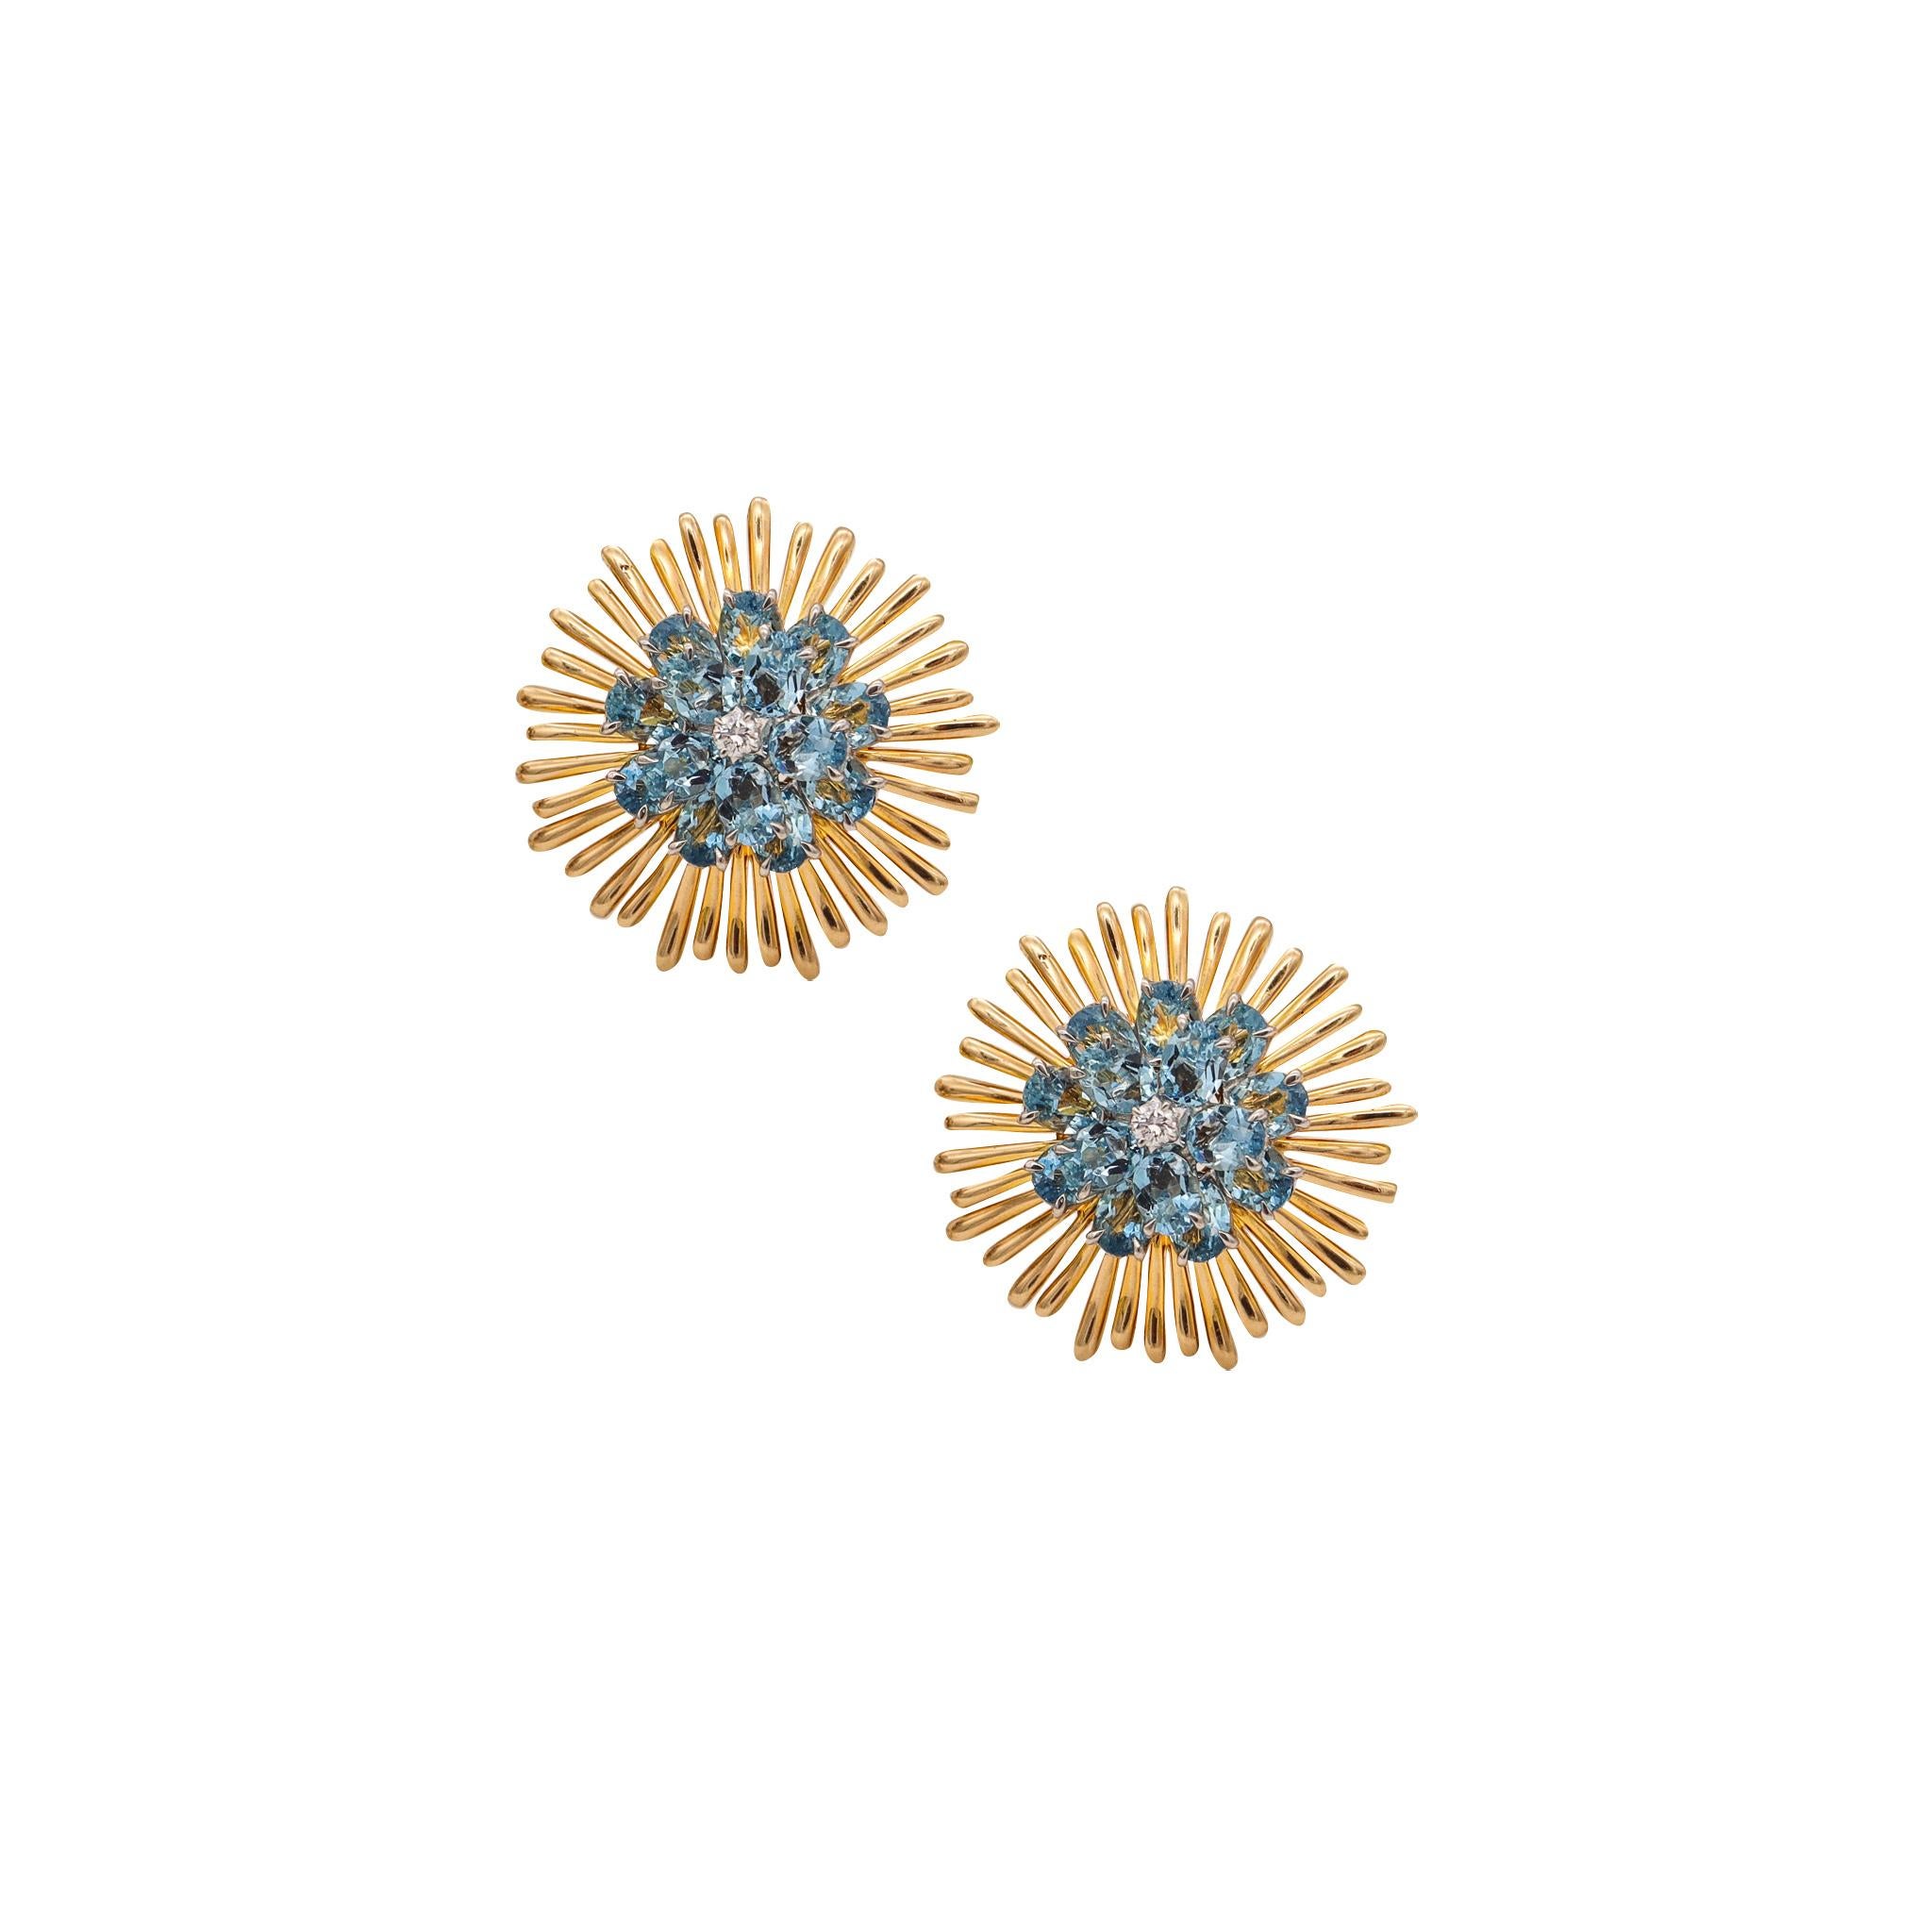 Cluster earrings designed by Donald Claflin (1935-1979) for Tiffany & Co.

An exceptionally rare pieces, created in New York City at the Tiffany Studios by Donald Claflin, back in the 1960's. These beautiful bold pair of clips-earrings has been